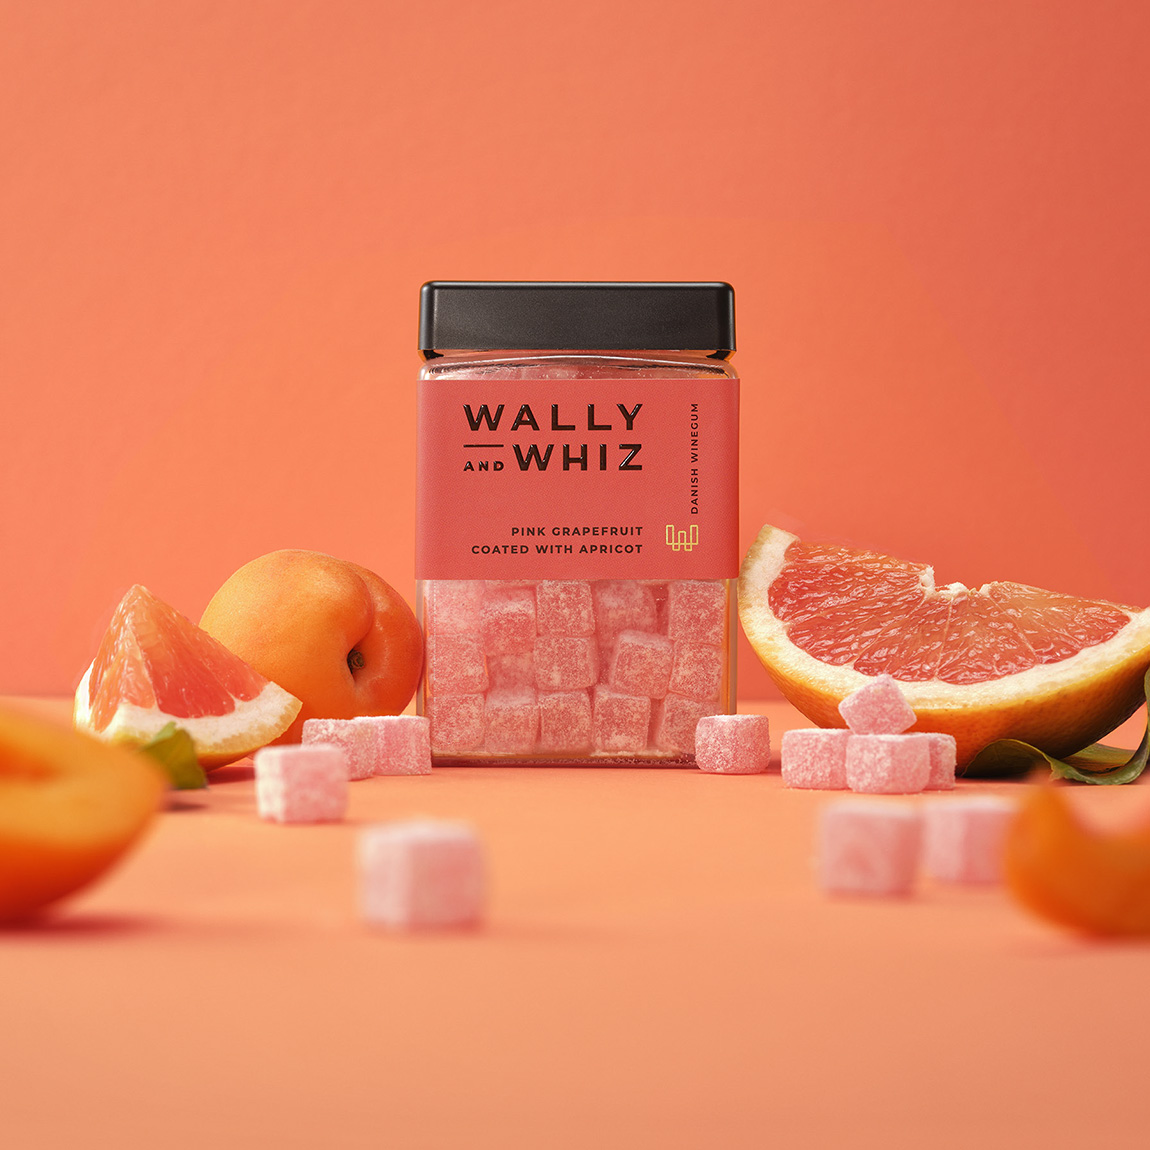 Wally and Whiz: The wine gum that connects people, families and cultures